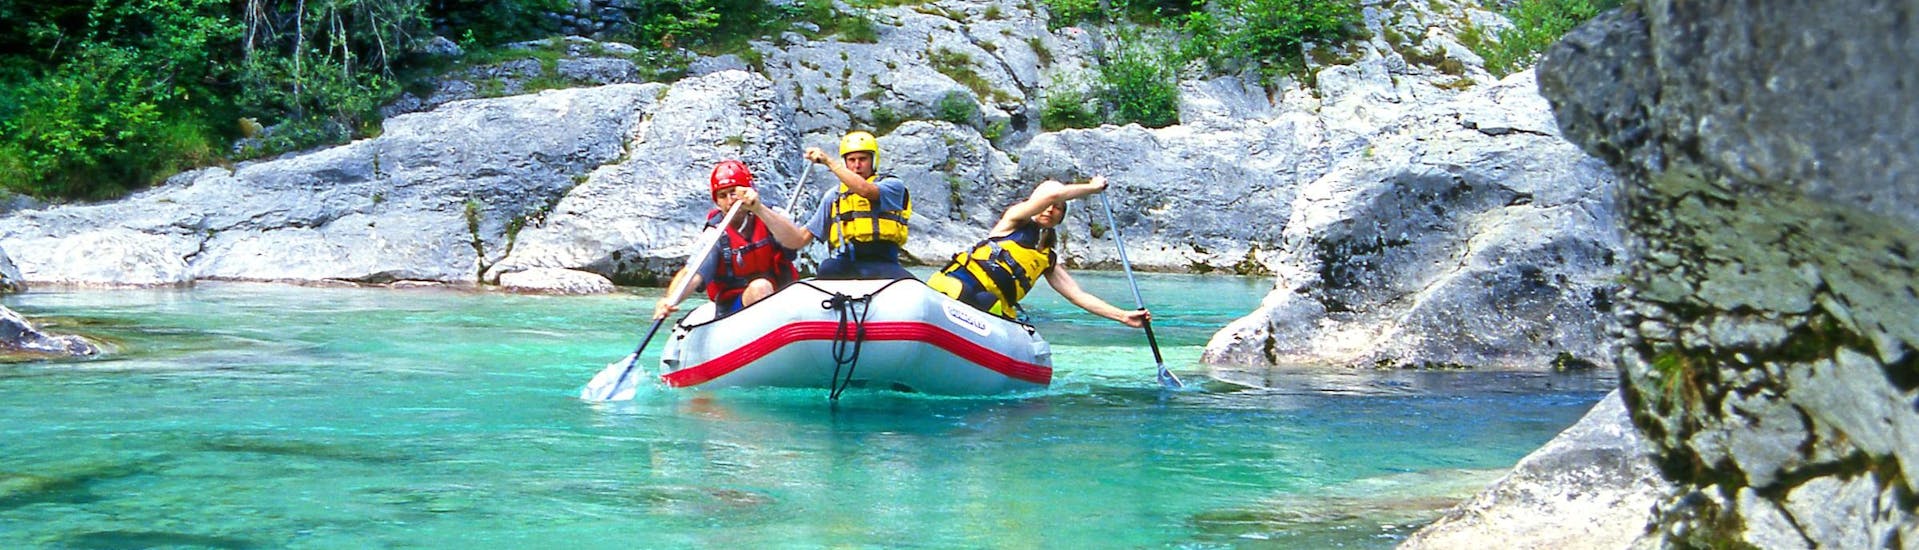 A group of young people enjoying some white water rafting fun in the rafting & canyoning hotspot of Soča Valley .